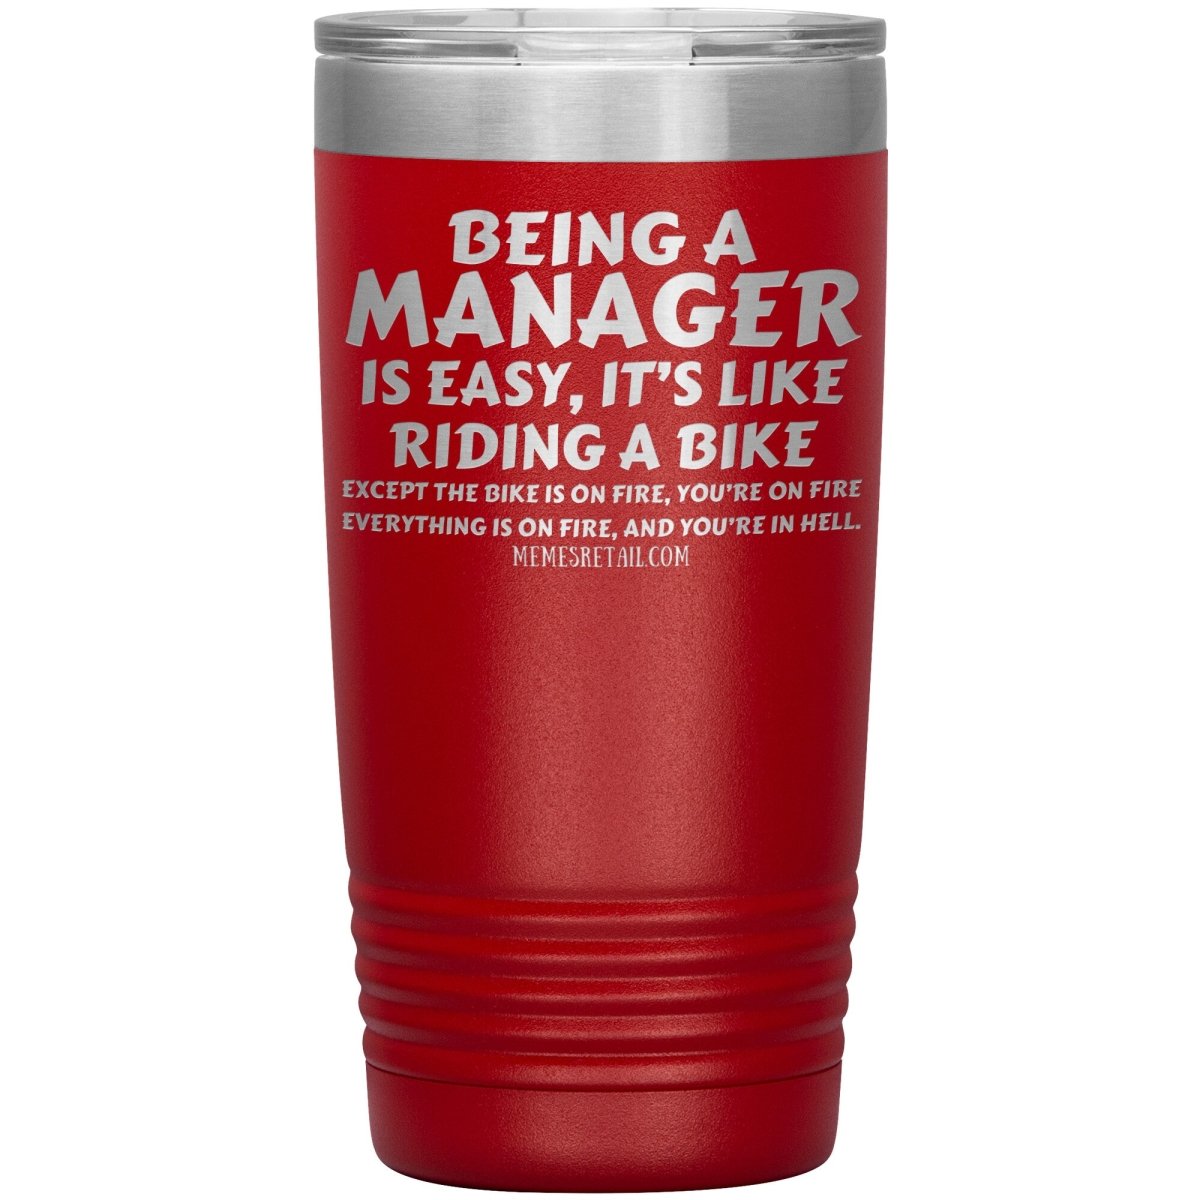 Being a manager is easy Tumblers, 20oz Insulated Tumbler / Red - MemesRetail.com